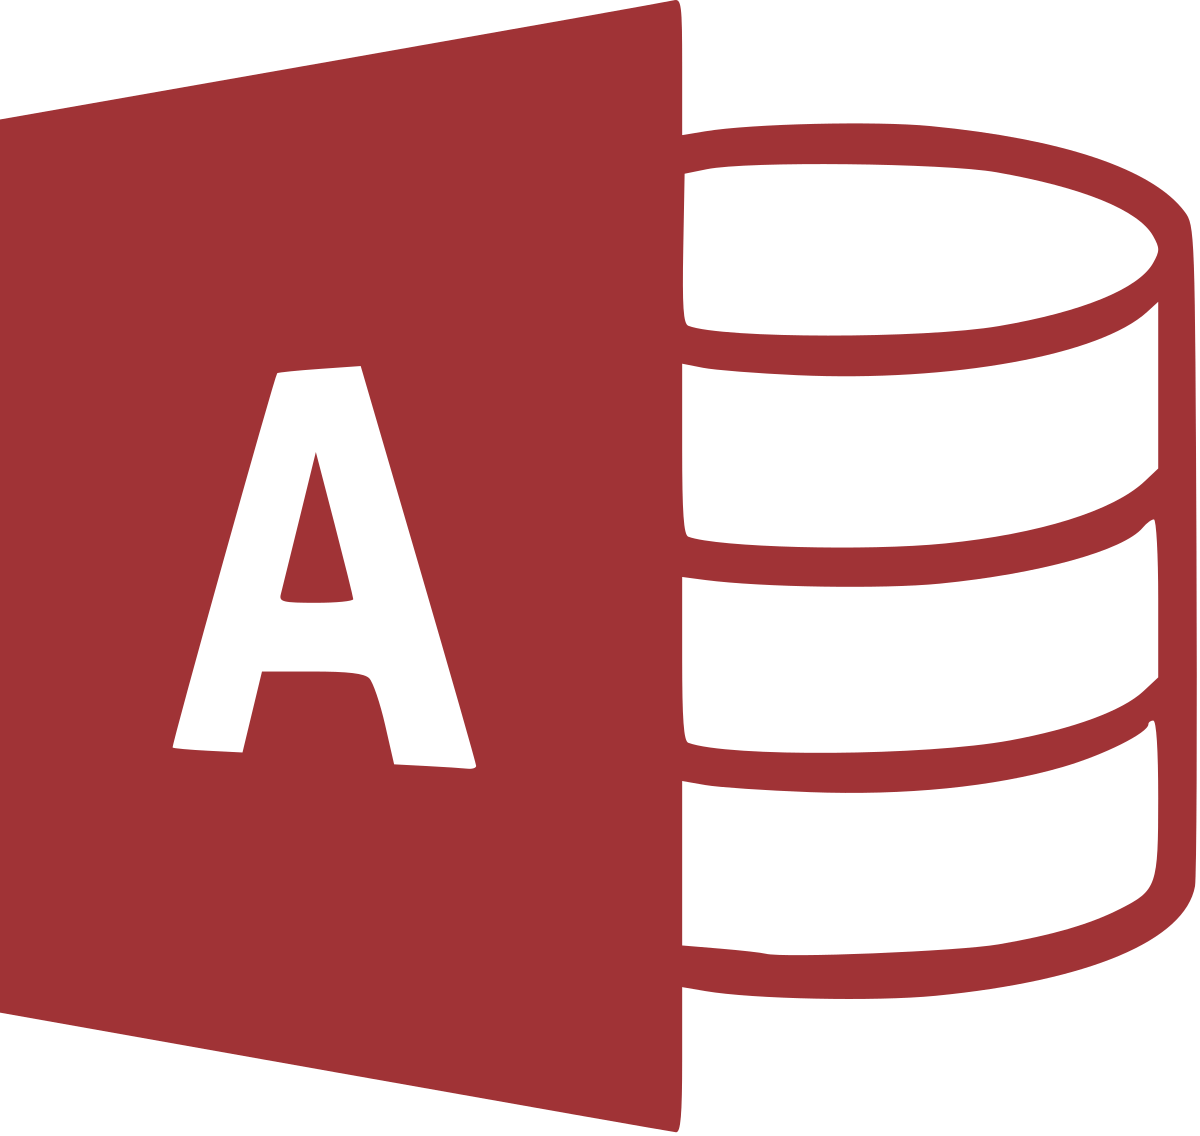 Excel Office 2013 Logo - Microsoft Access